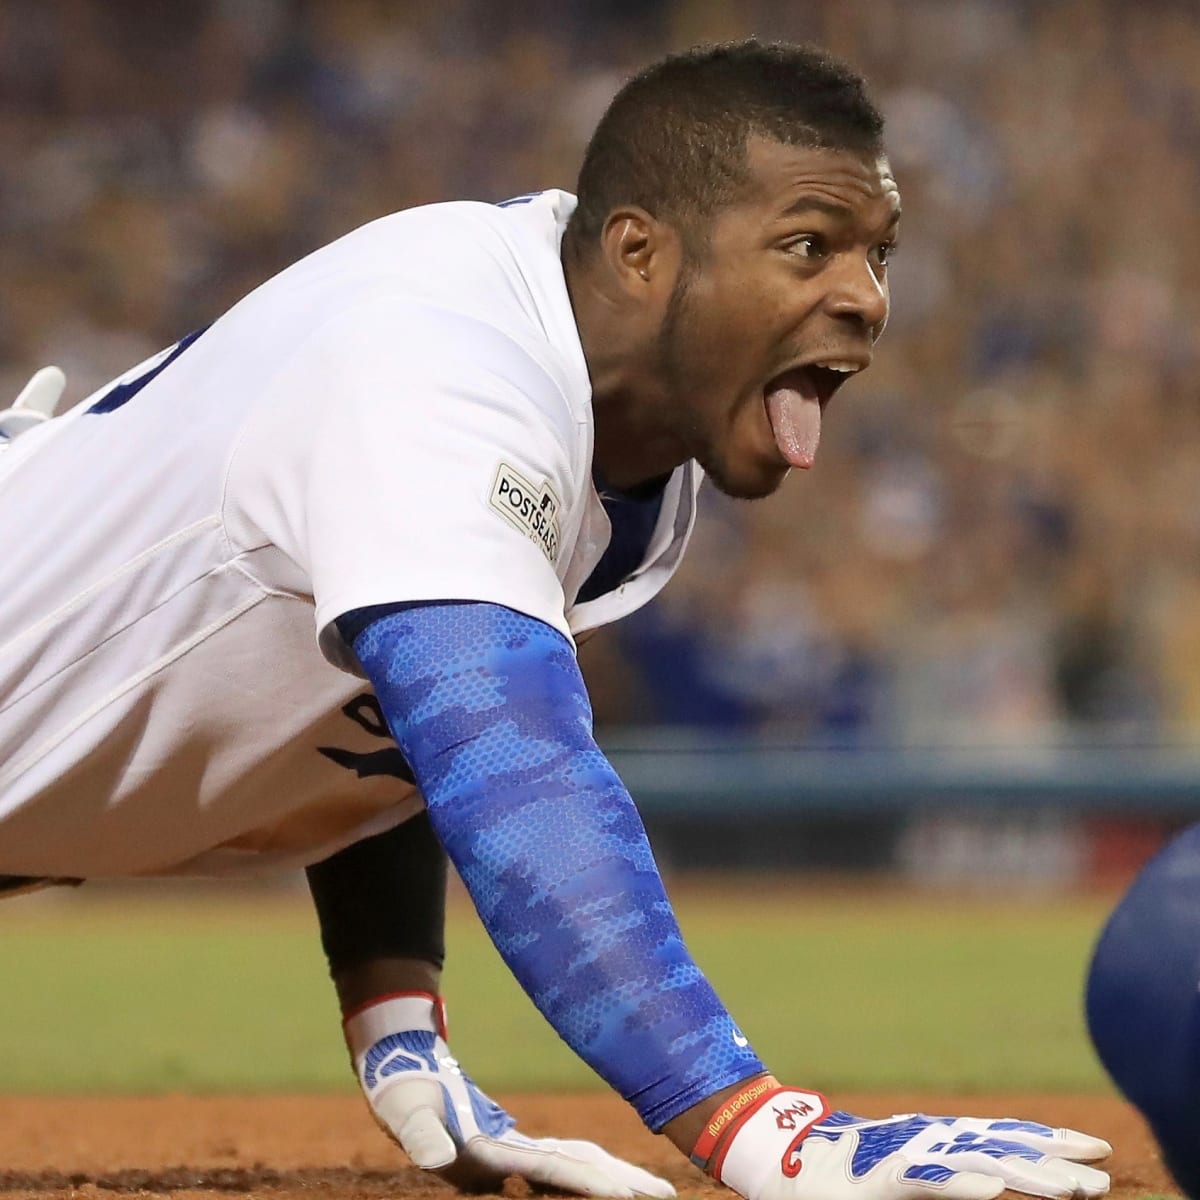 Dodgers see matured Yasiel Puig, quirks and all: 'As focused as I